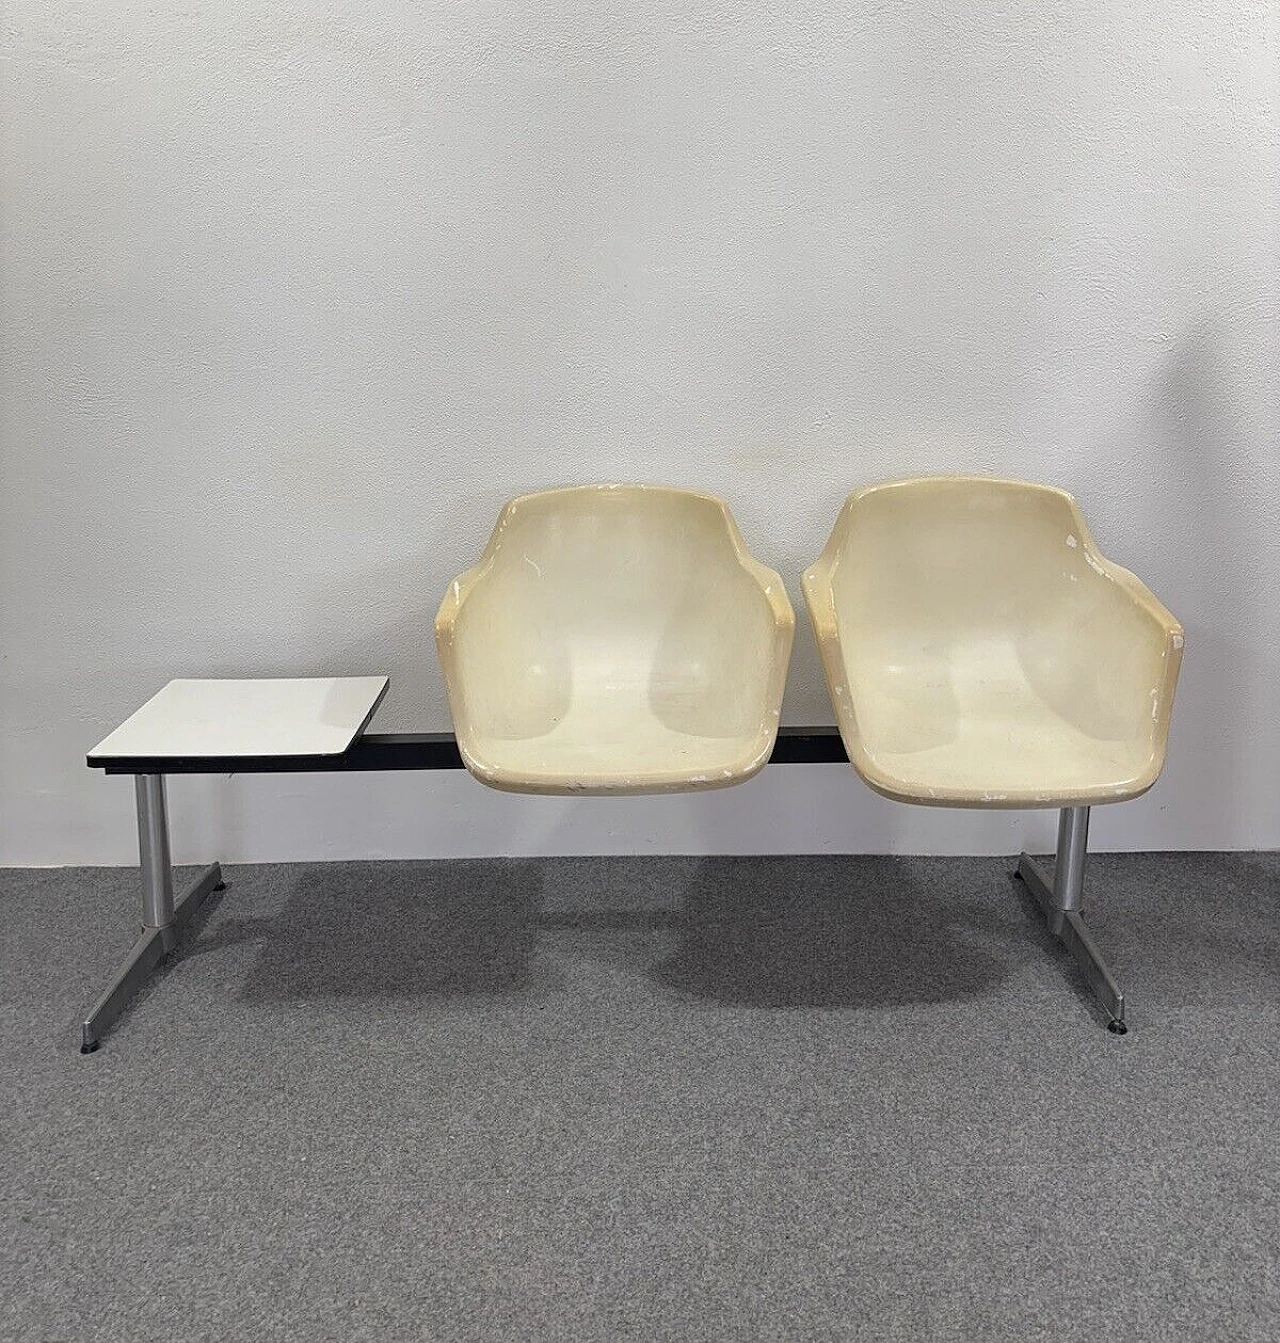 Tandem airport bench by Charles and Ray Eames for Herman Miller 1